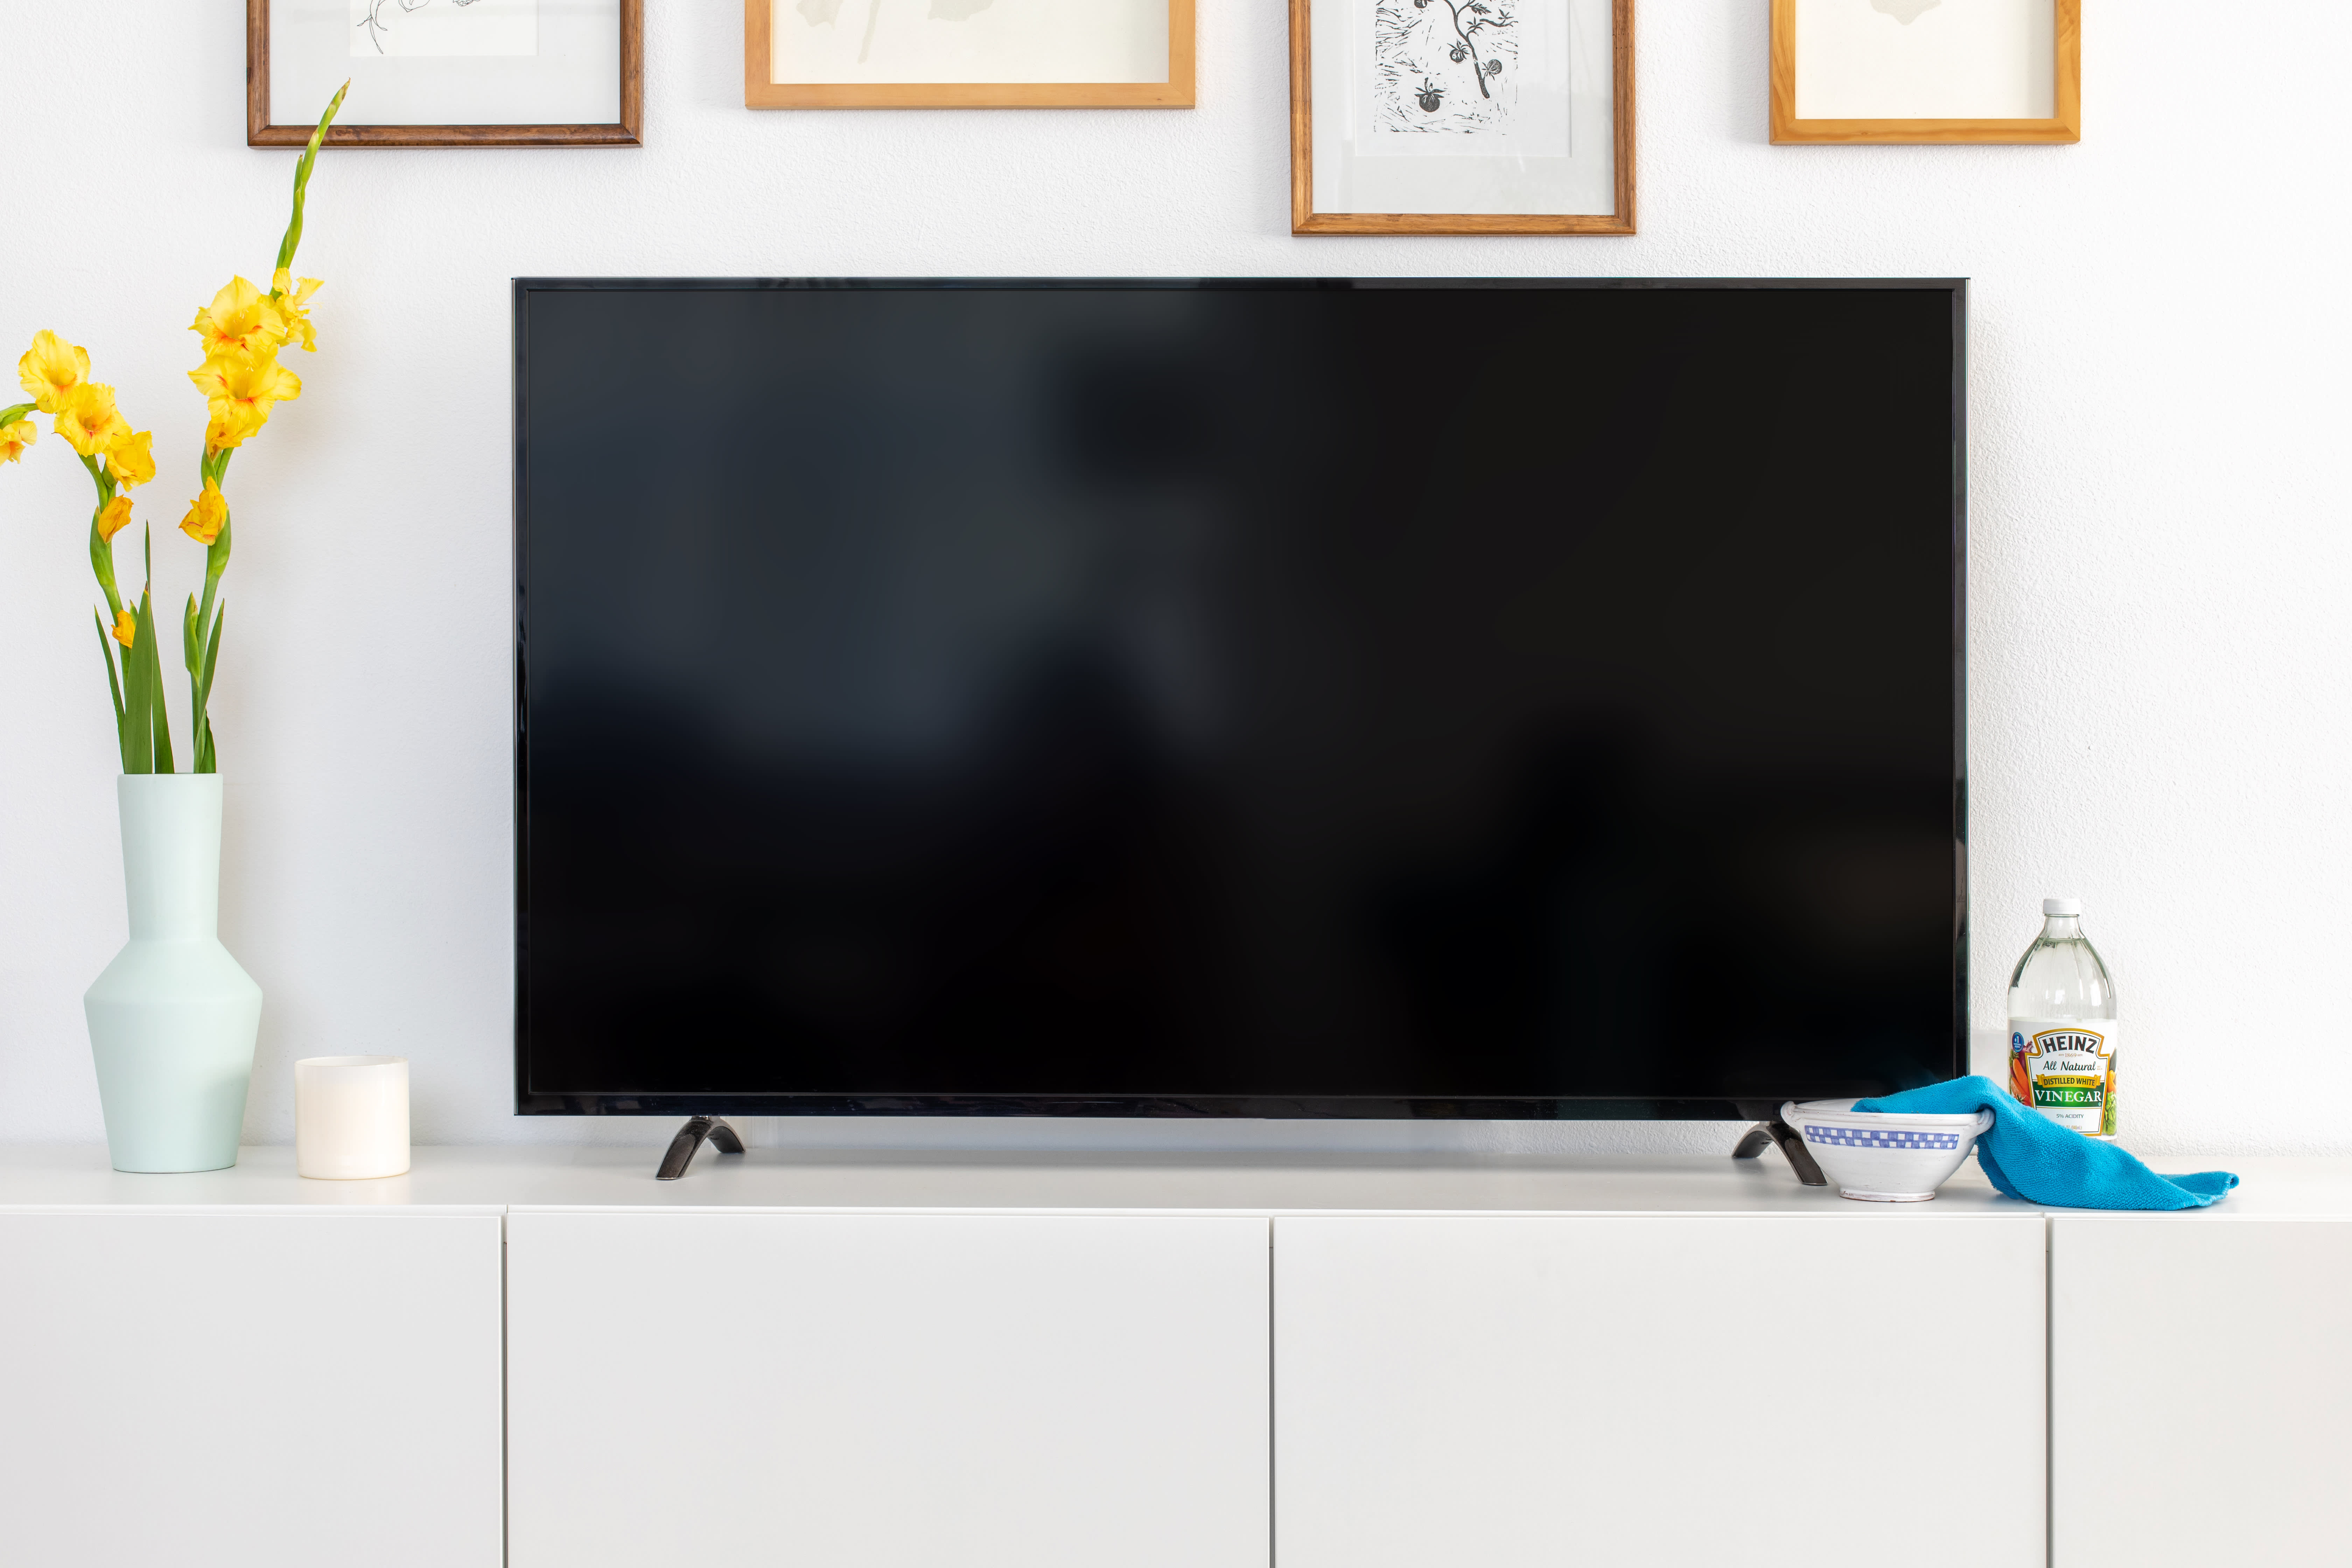 How to Clean a TV Screen: A Step-by-Step Guide With Photos